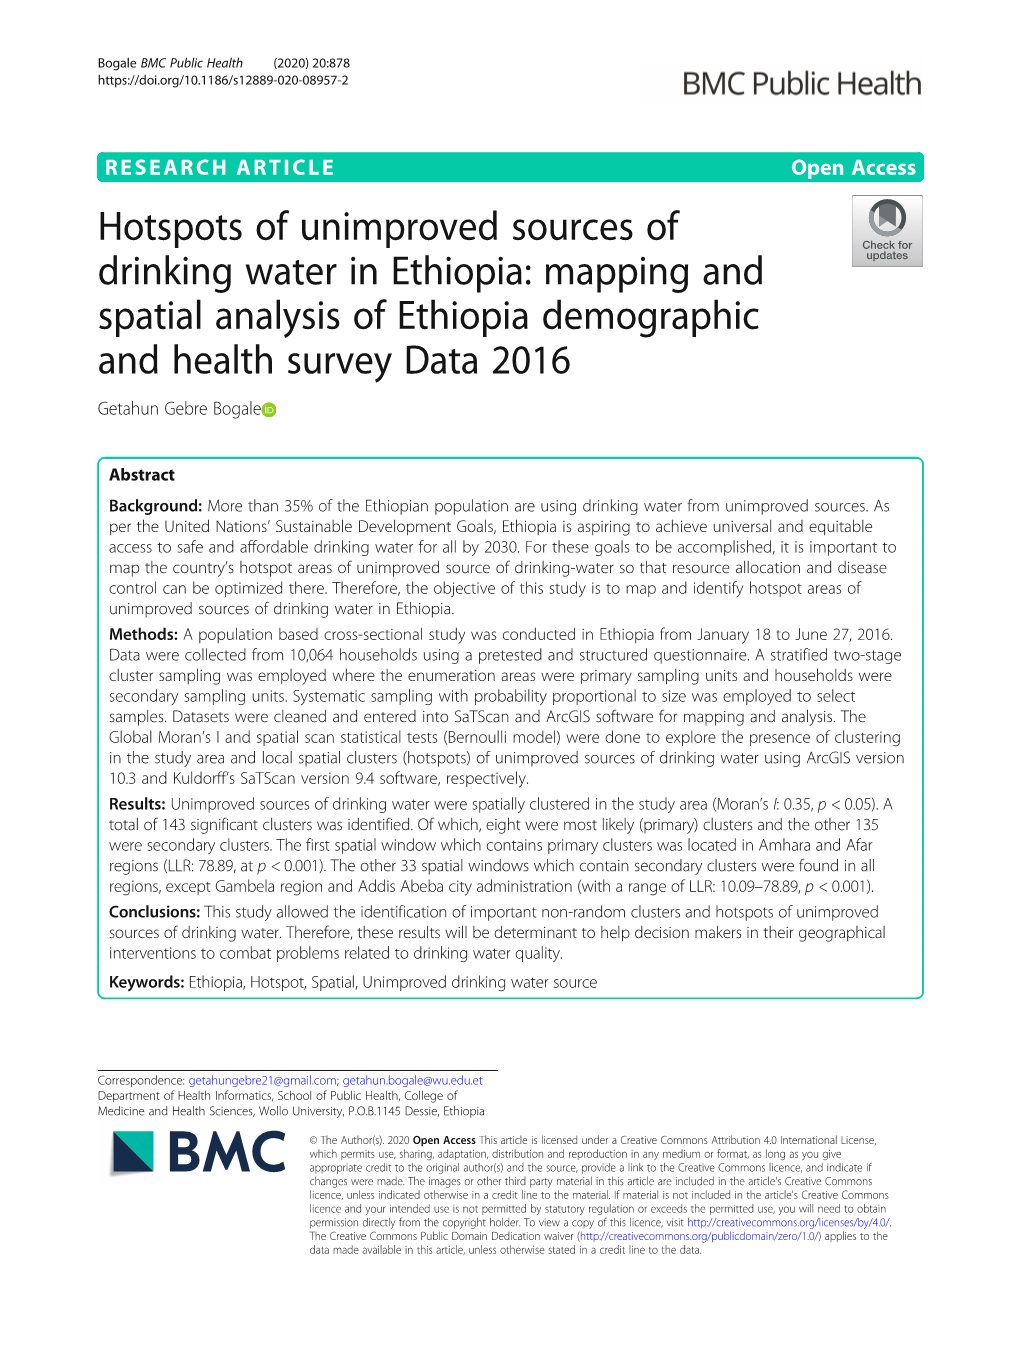 Hotspots of Unimproved Sources of Drinking Water in Ethiopia: Mapping and Spatial Analysis of Ethiopia Demographic and Health Survey Data 2016 Getahun Gebre Bogale